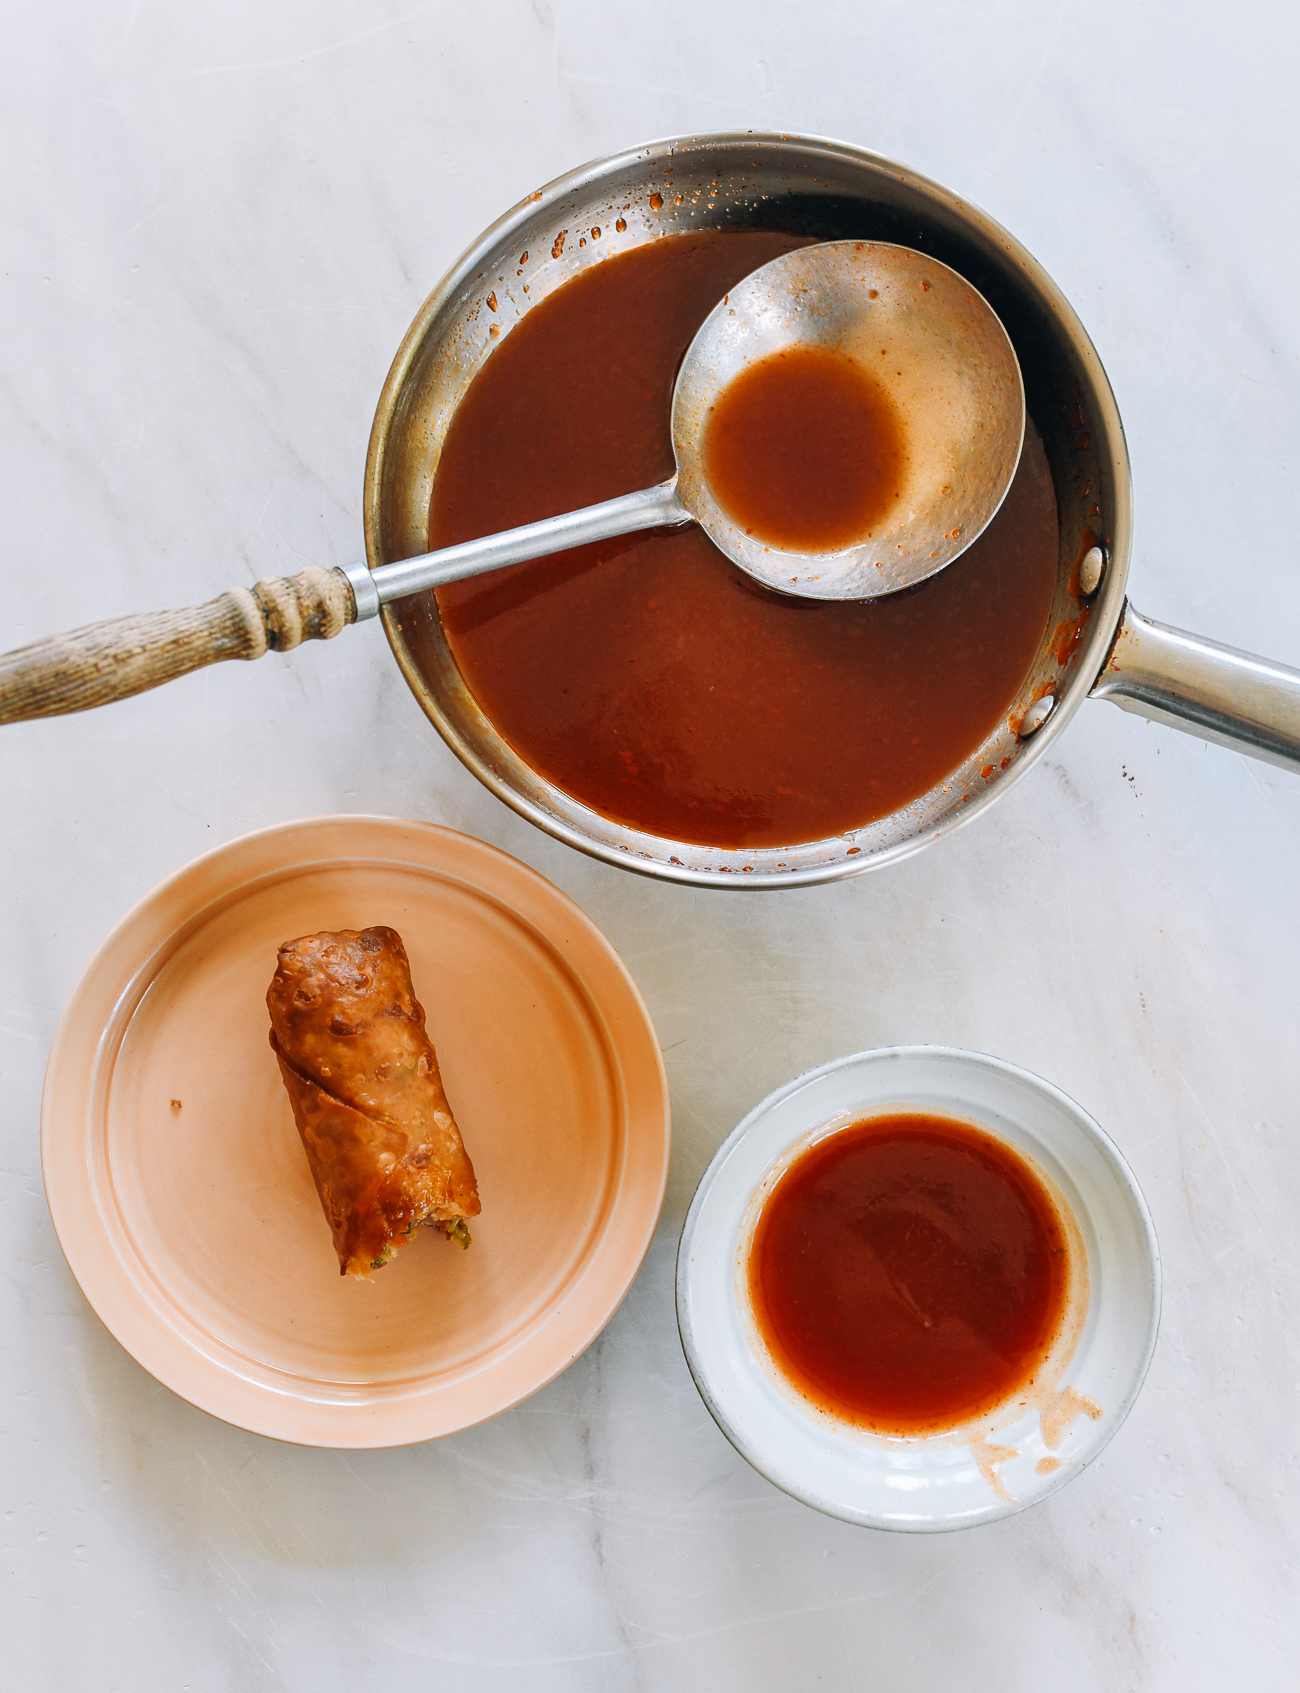 sweet and sour sauce served with fried takeout egg roll